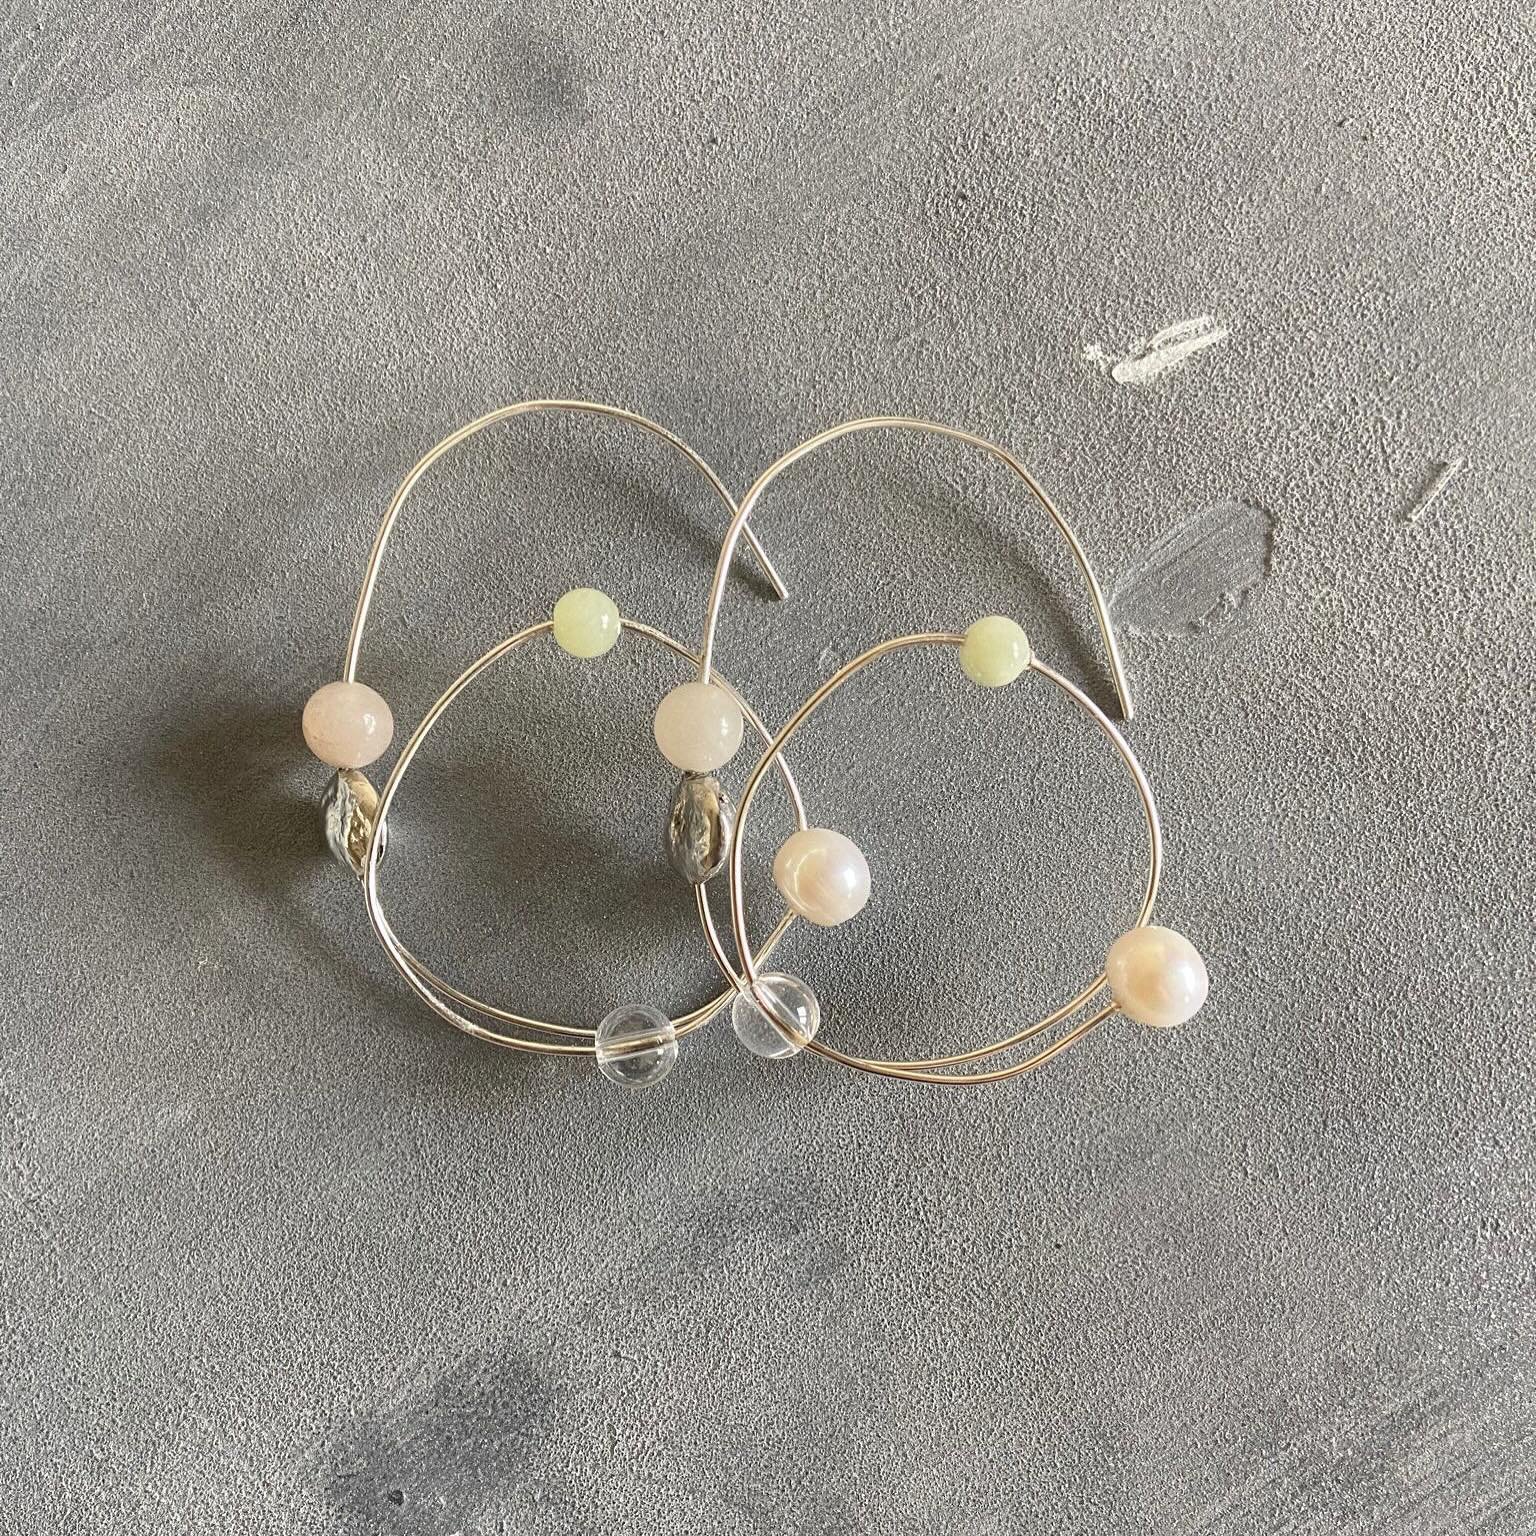 PEARLY HOOPS BY @malaikaraiss + @_studioena 🎪

+

When two creative minds unite - dream become reality

The PEARLY HOOPS are a creative collaboration between Malaika and upcoming Jewelry Designer Elena Kayser @_studioena

&ldquo;I am a huge fan of E